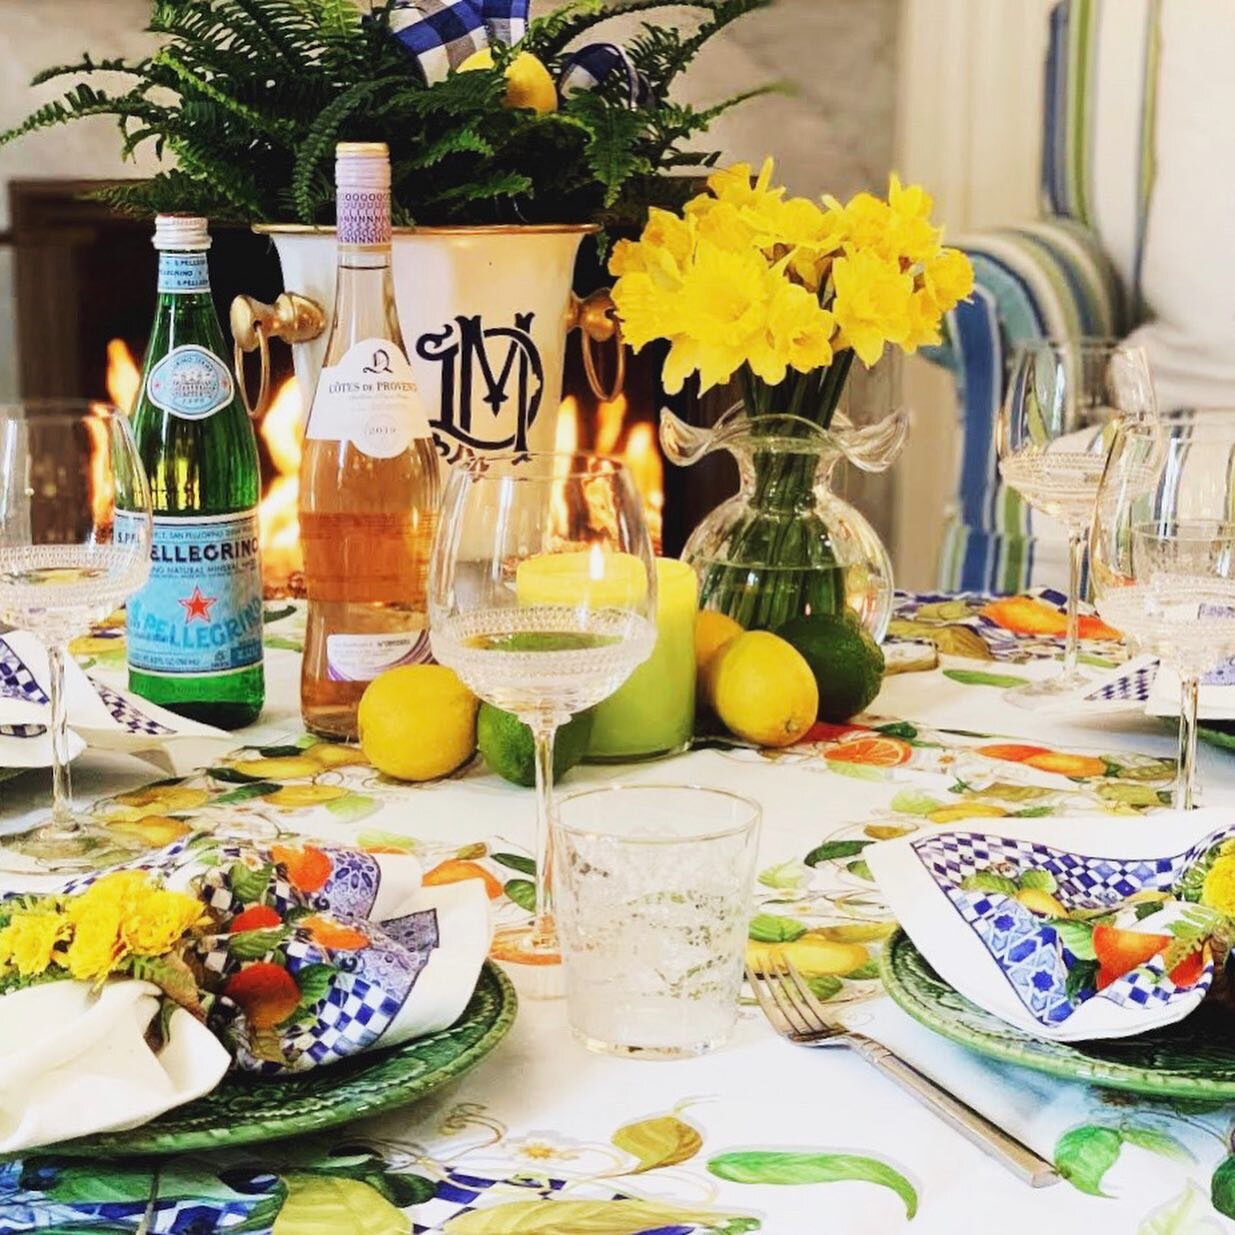 Happy first day of spring! 🍋 #interiordesign #springtime #tablescapes